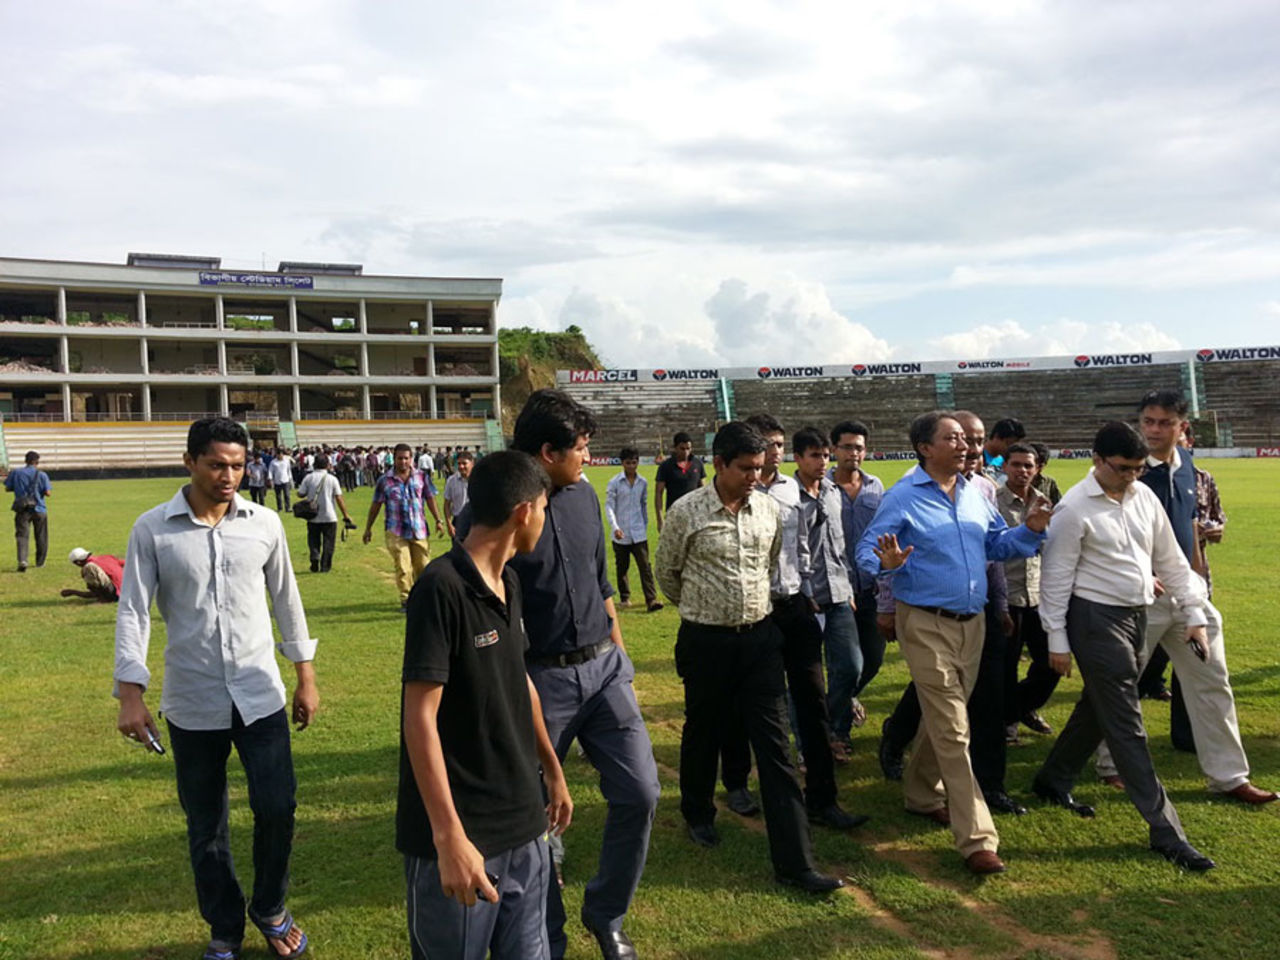 BCB President Nazmul Hassan leads a group of people onto Sylhet Divisional Stadium, Sylhet, July 8, 2013